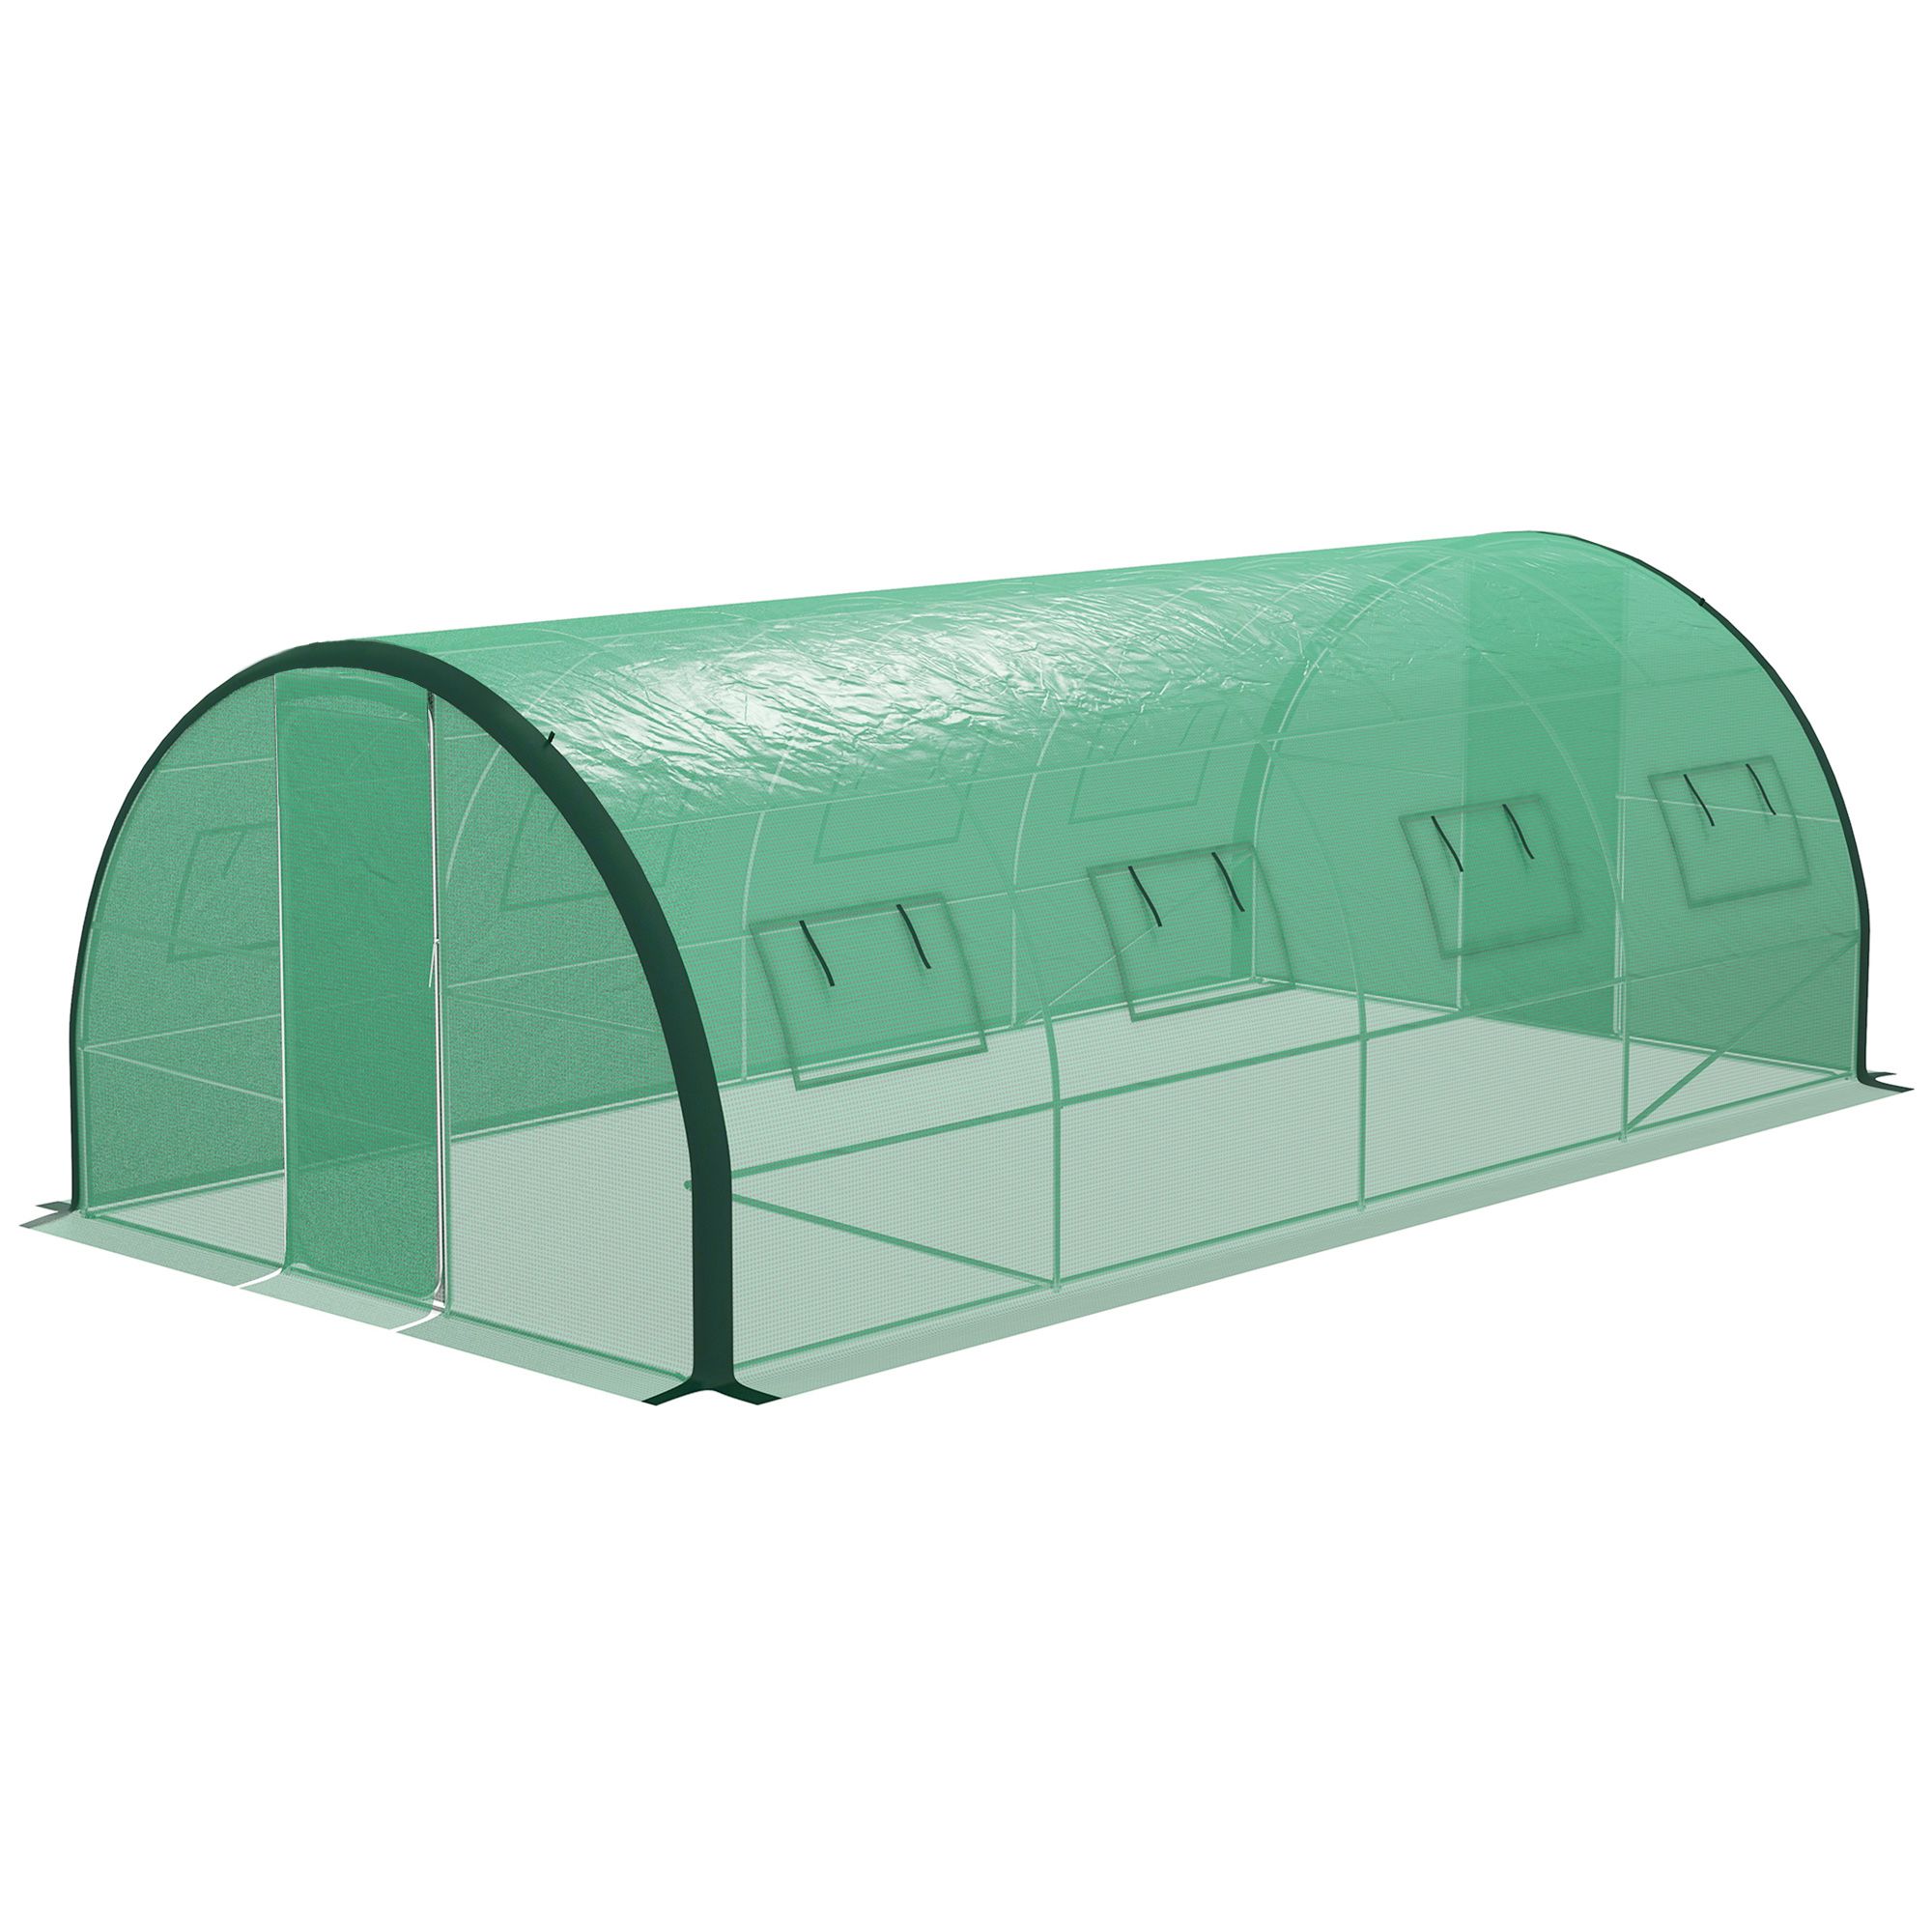 Outsunny Polyethylene Upgraded Structure Walk-in Polytunnel Greenhouse, 6 X 3(m), Green